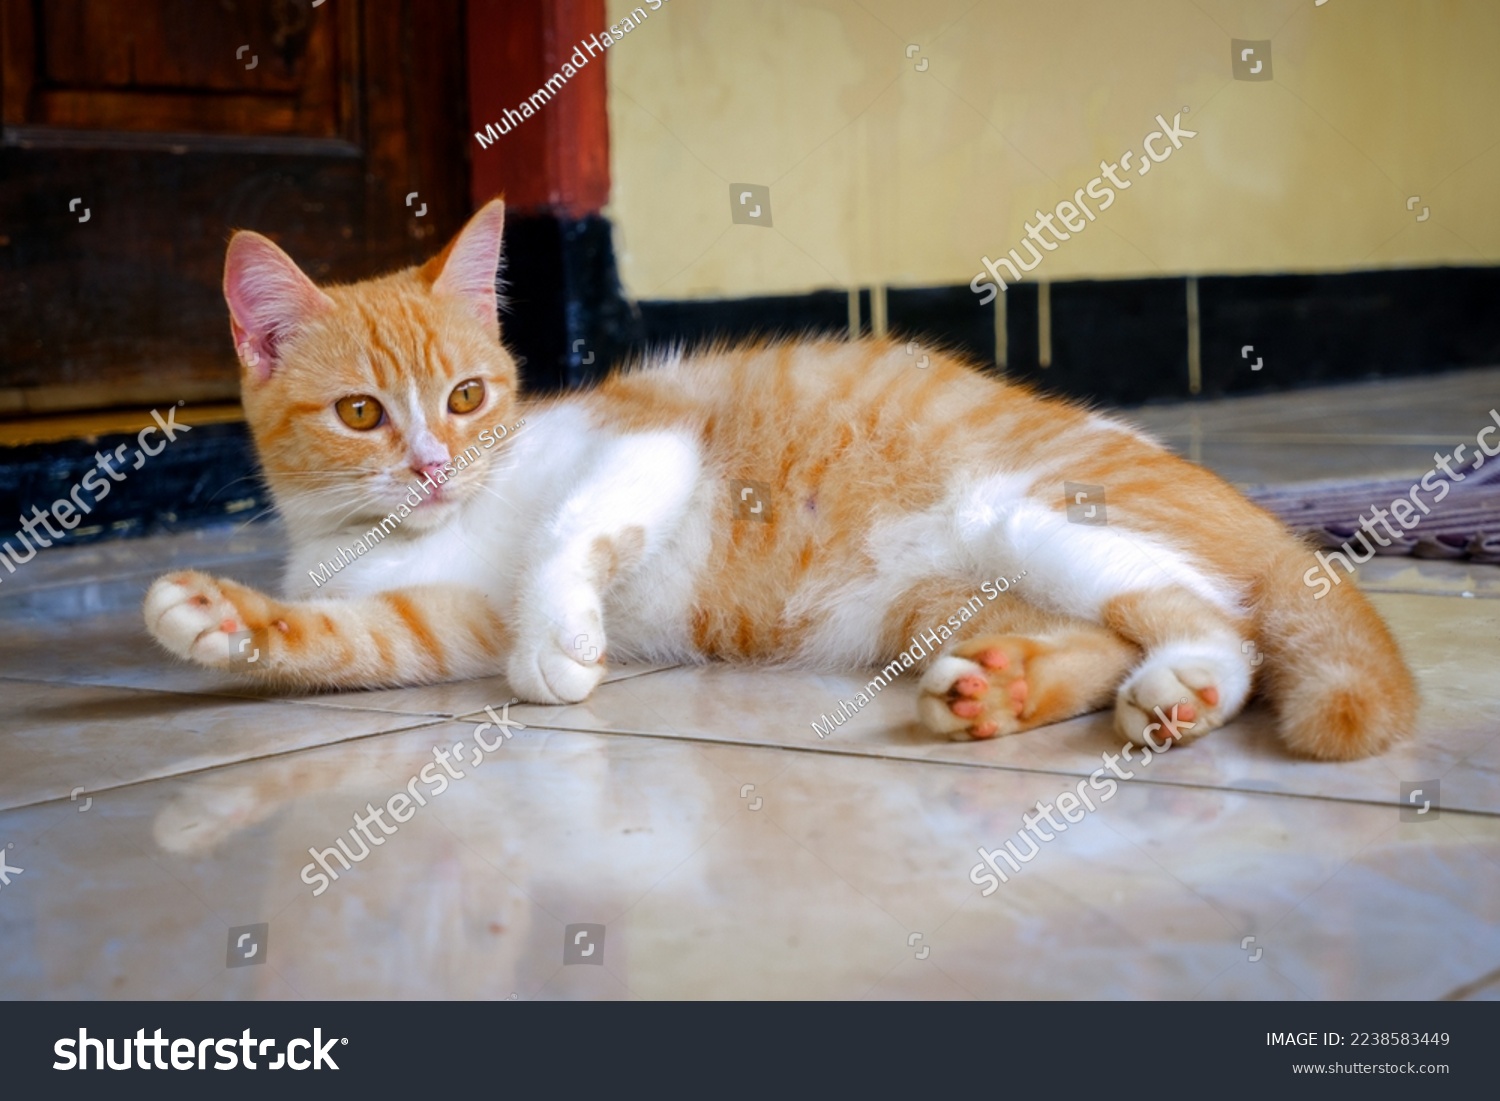 beauty orang lazy cat, after play around he was tired an take several break #2238583449